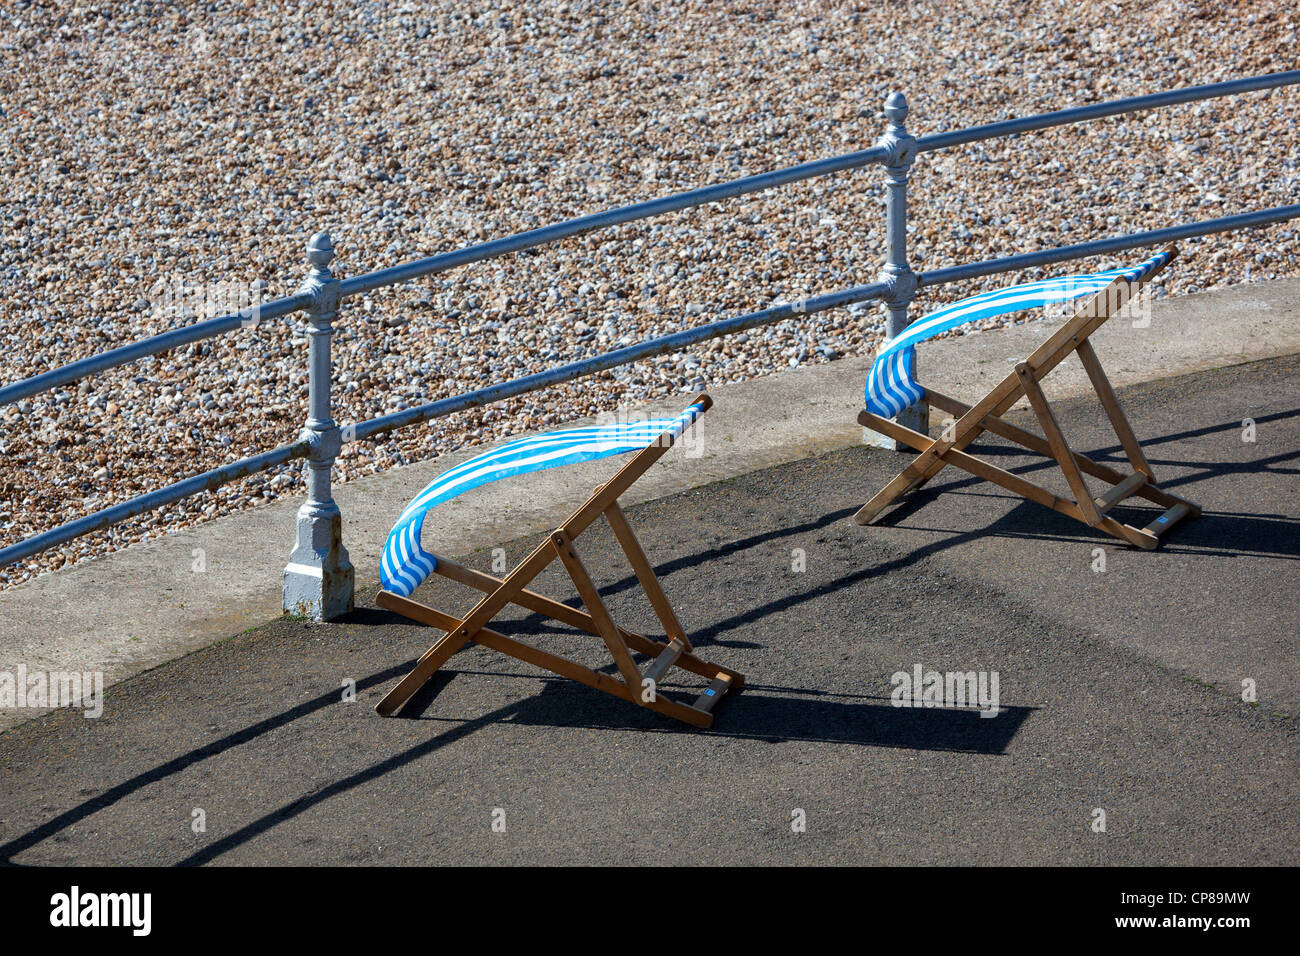 Deckchairs at Bexhill on Sea Stock Photo